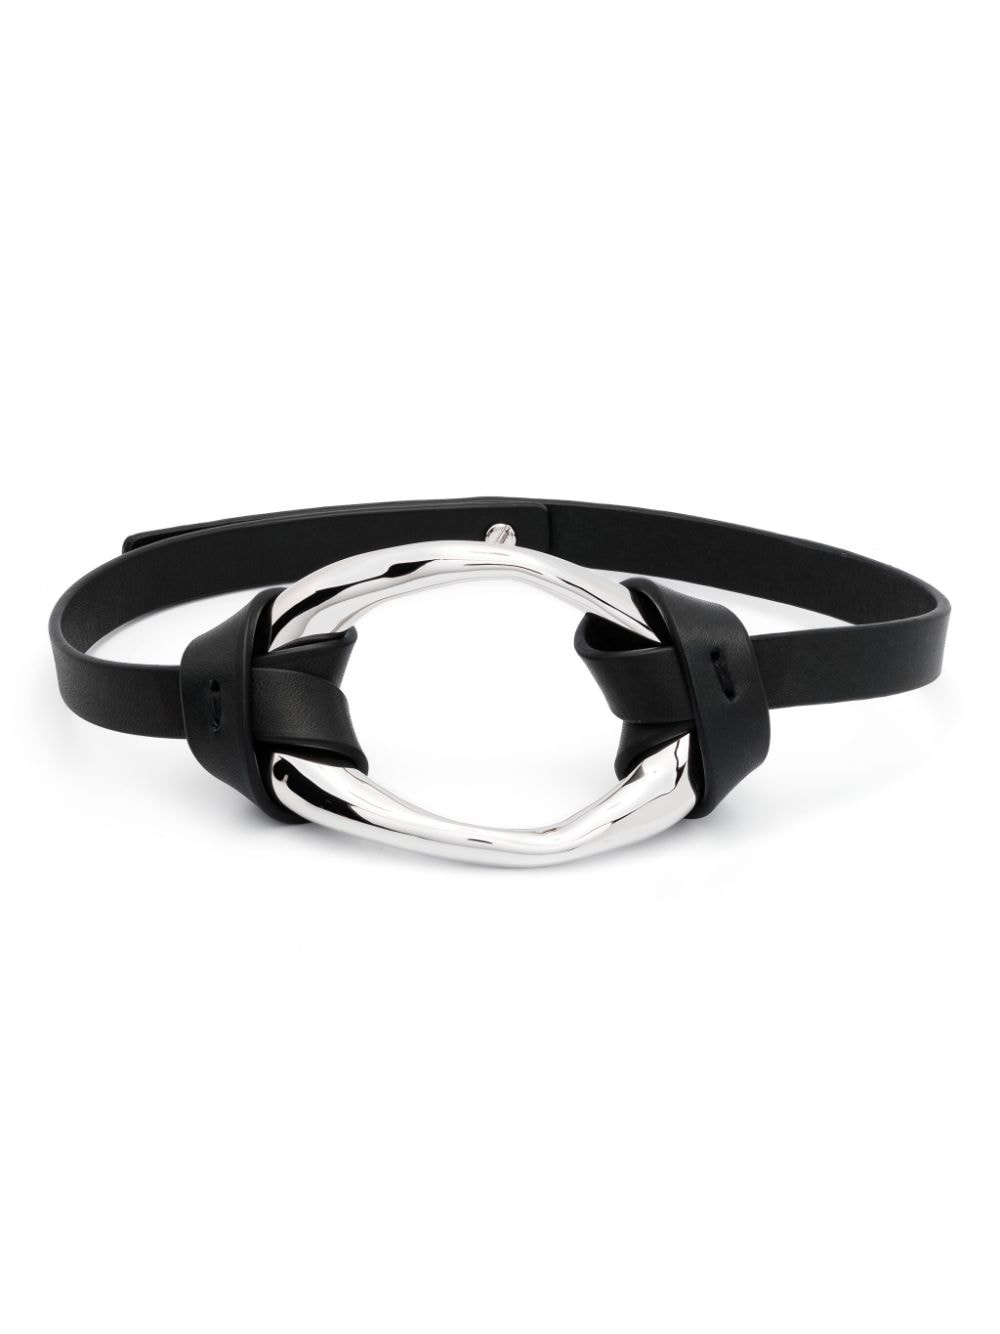 leather choker necklace - 1